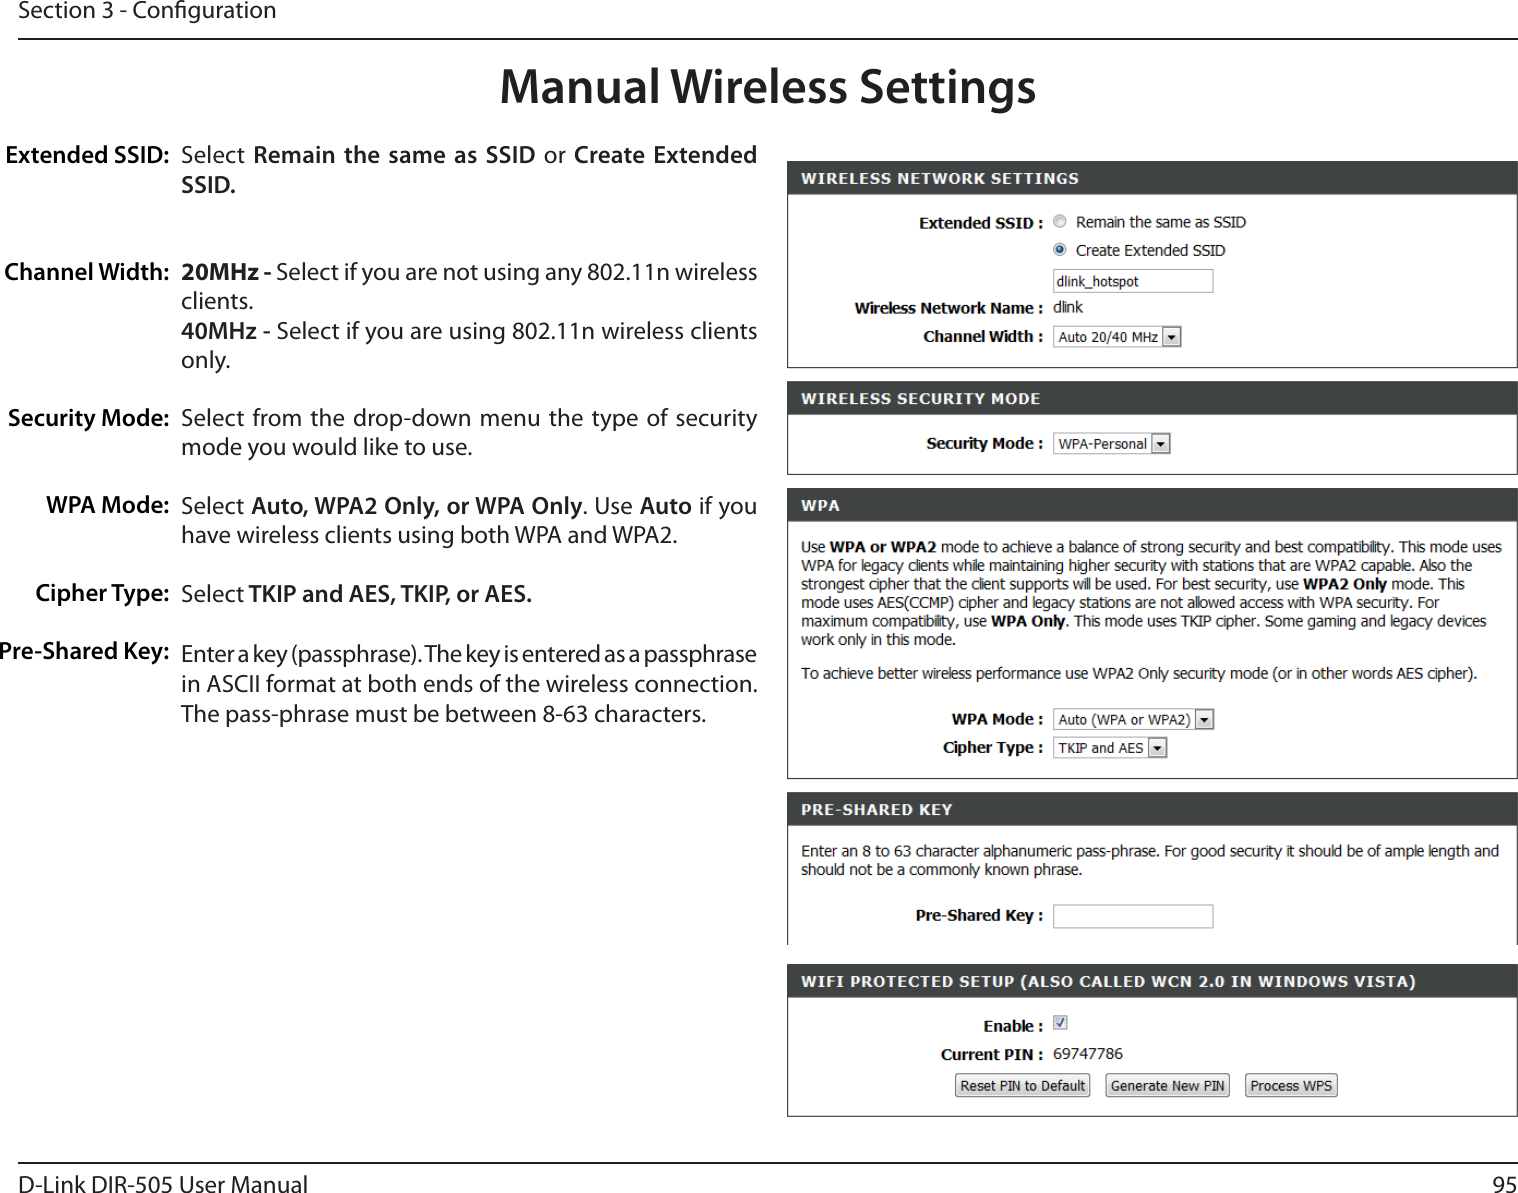 95D-Link DIR-505 User ManualSection 3 - CongurationManual Wireless SettingsExtended SSID:Channel Width:Security Mode:WPA Mode:Cipher Type:Pre-Shared Key:Select  Remain  the same  as SSID  or Create Extended SSID.20MHz - Select if you are not using any 802.11n wireless clients.40MHz - Select if you are using 802.11n wireless clients only.Select  from the  drop-down menu the  type  of security mode you would like to use. Select Auto, WPA2 Only, or WPA Only. Use Auto if you have wireless clients using both WPA and WPA2.Select TKIP and AES, TKIP, or AES.Enter a key (passphrase). The key is entered as a passphrase in ASCII format at both ends of the wireless connection. The pass-phrase must be between 8-63 characters.